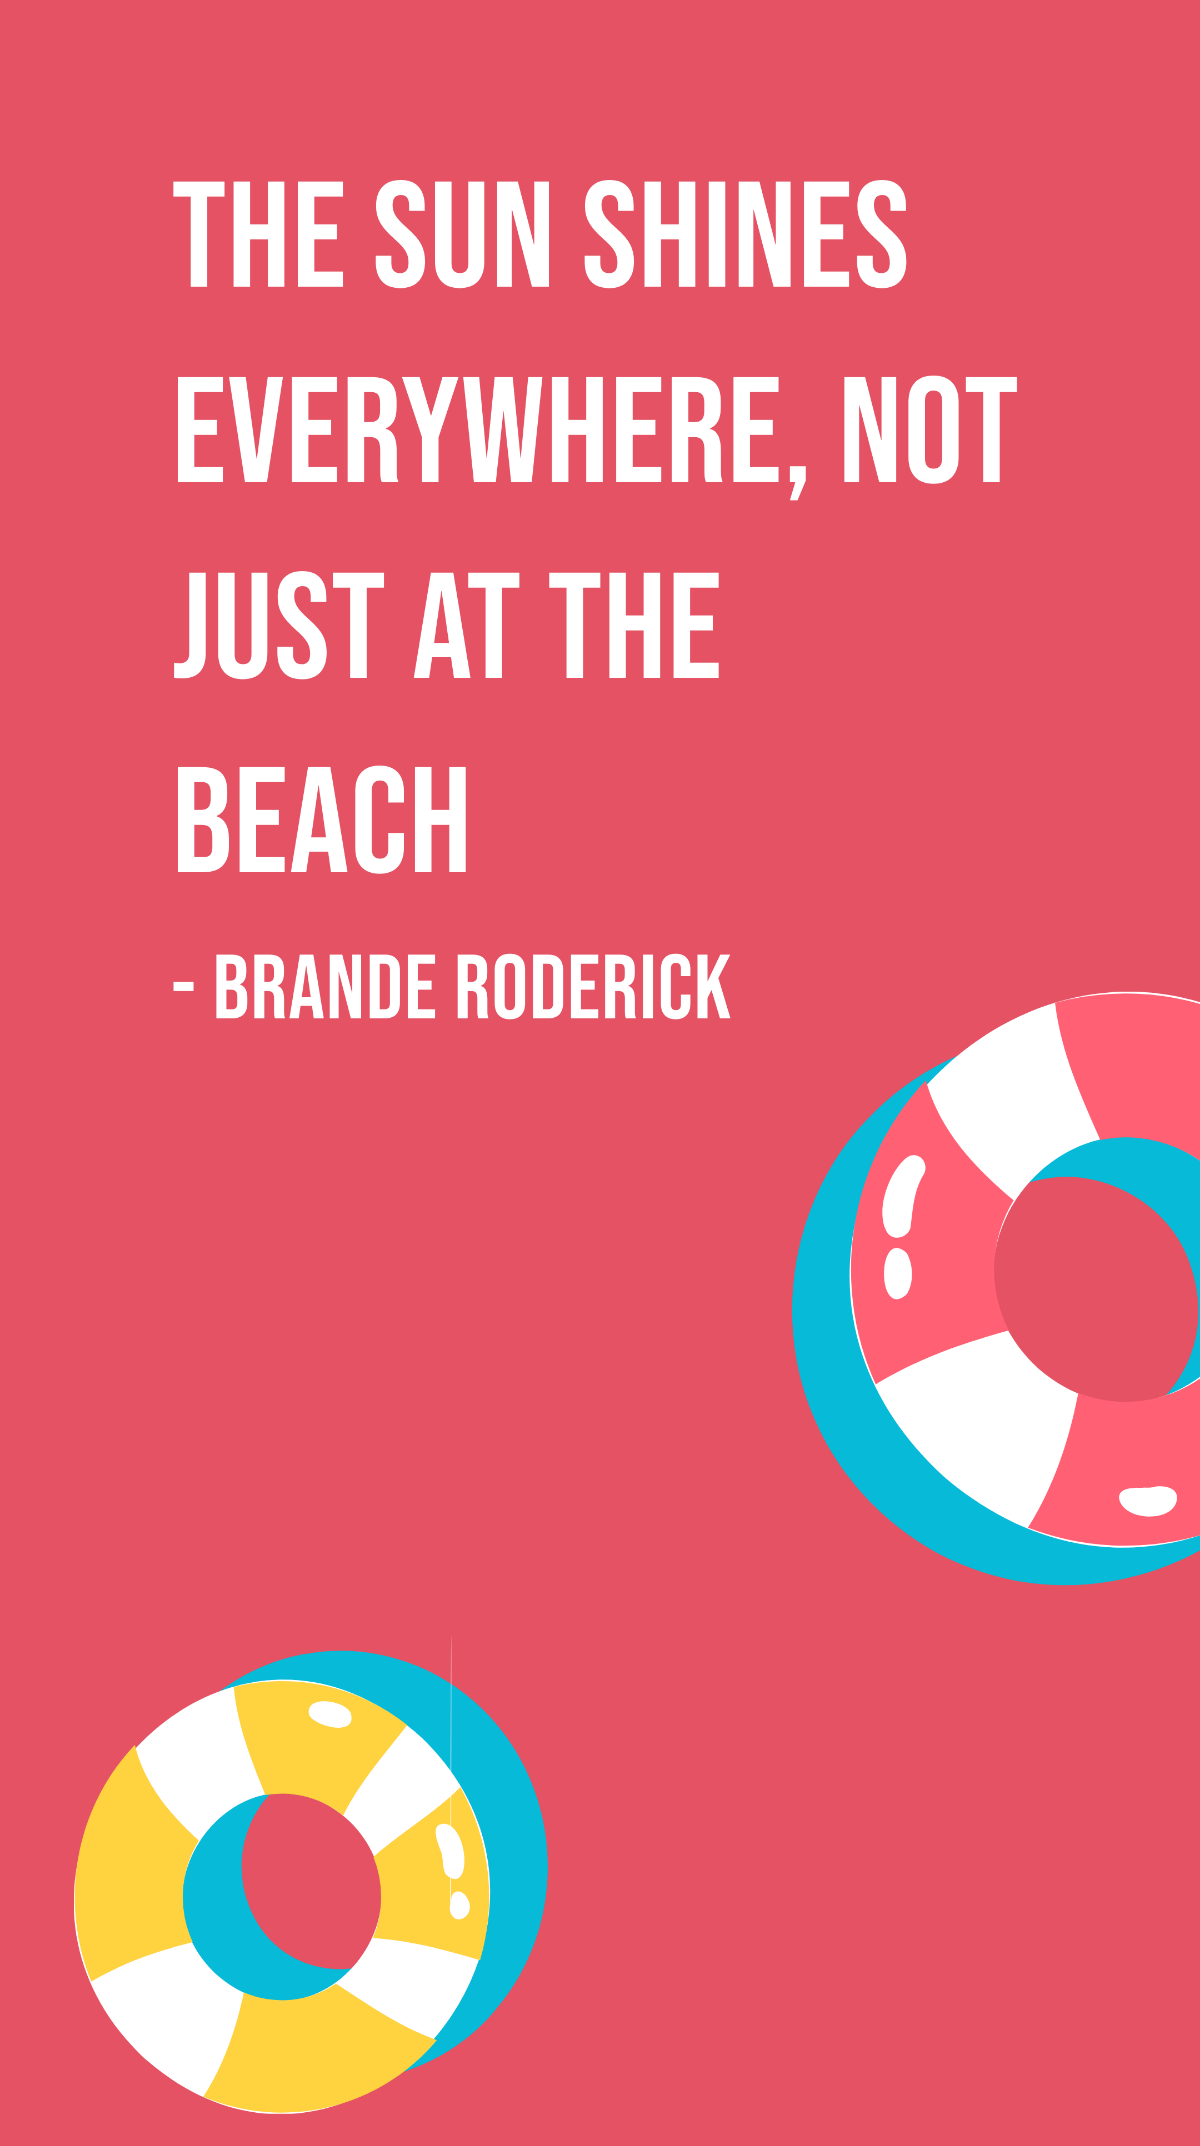 Brande Roderick - The sun shines everywhere, not just at the beach Template